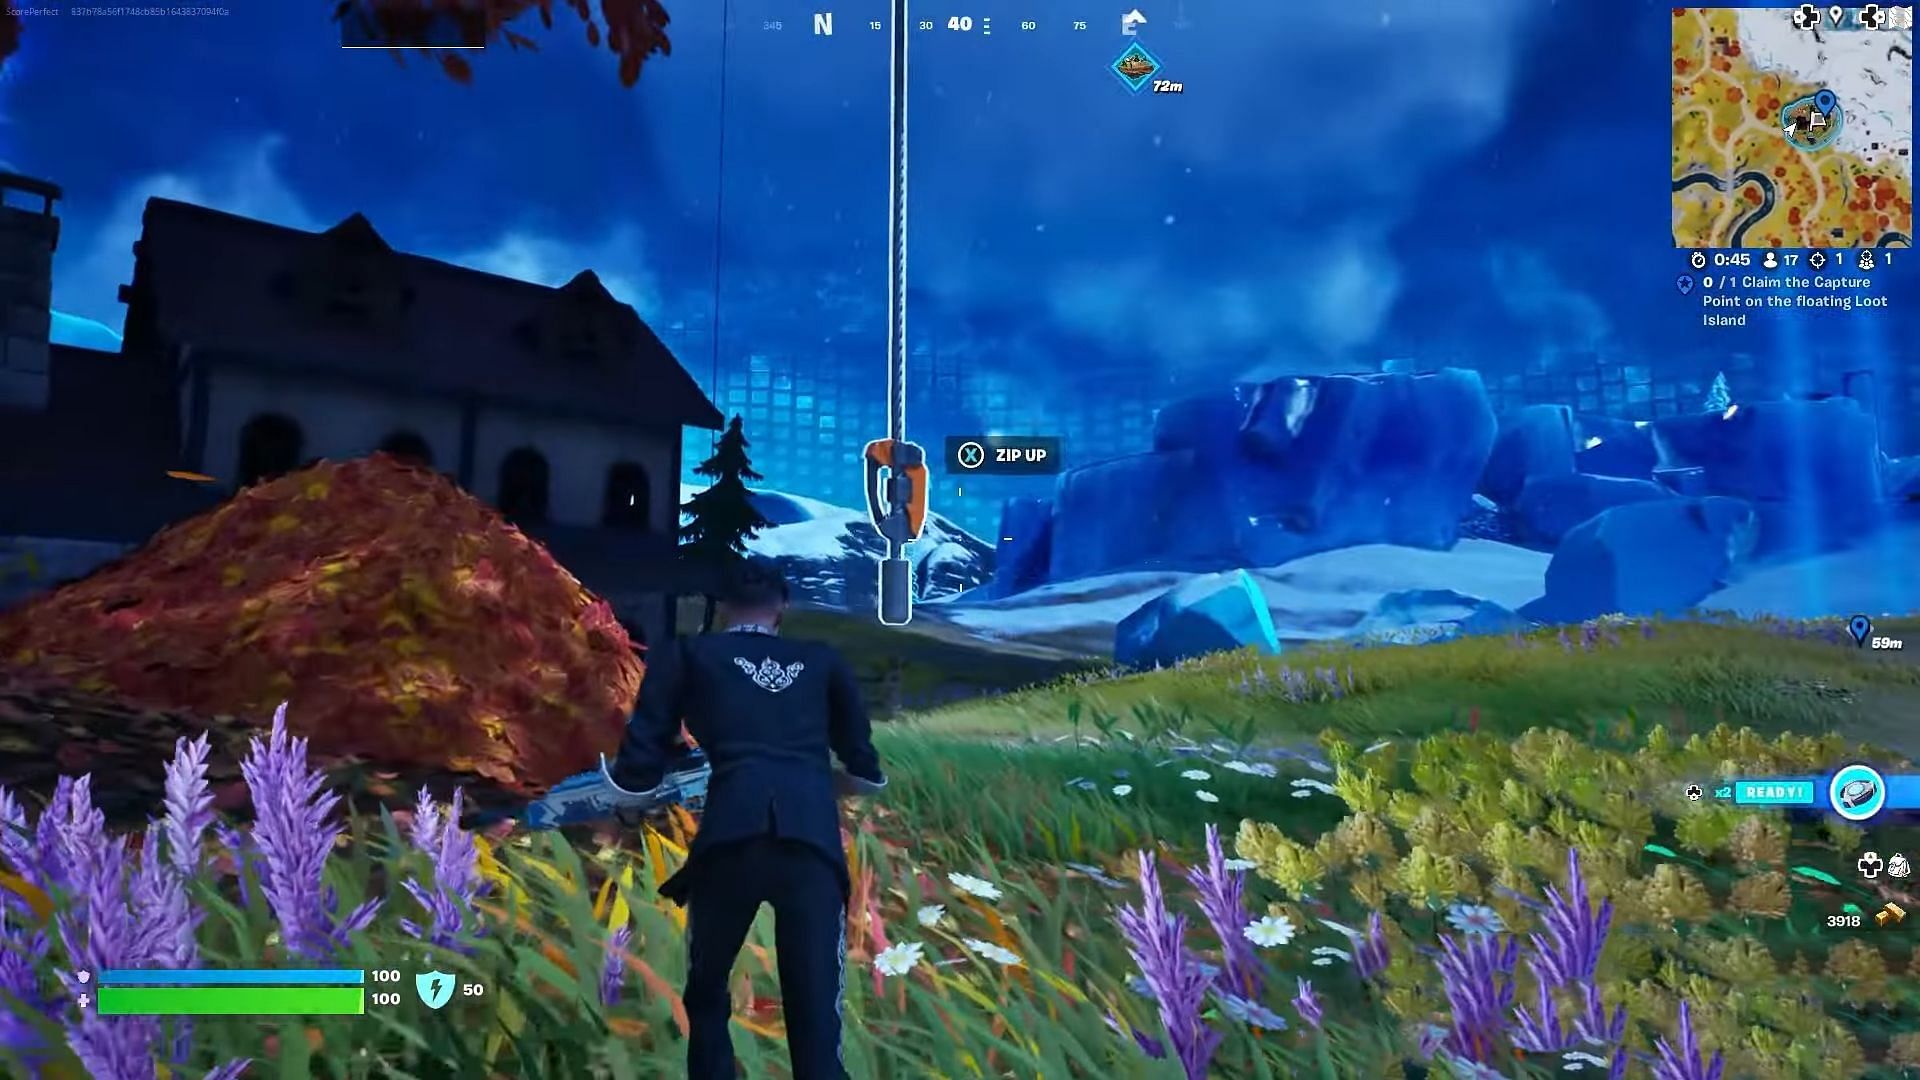 Use the zipline to reach the loot island (Image via Epic Games)